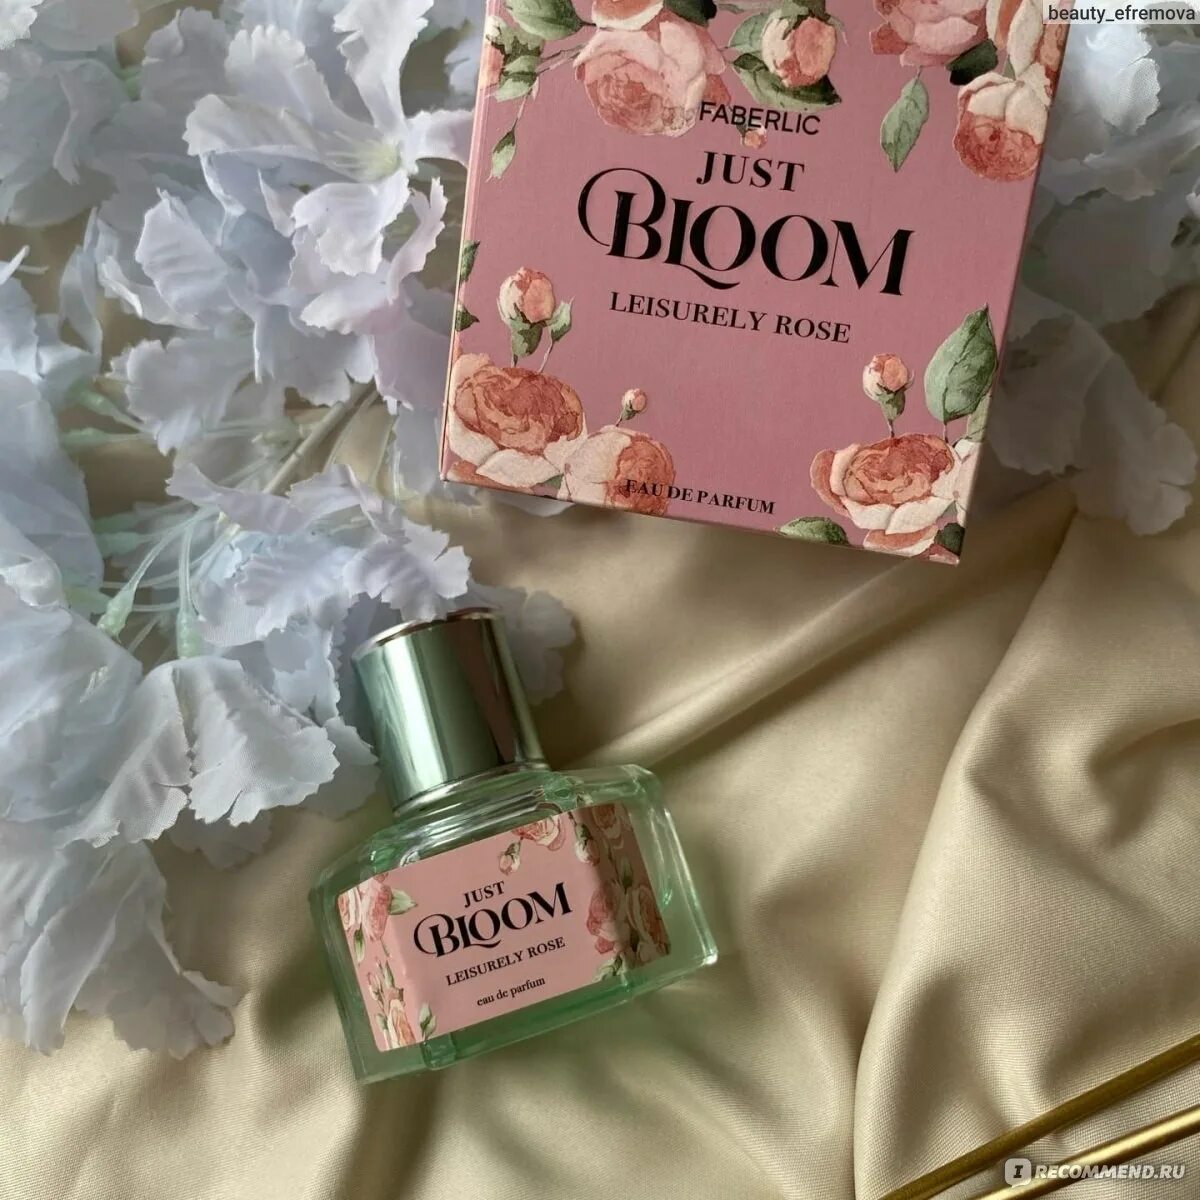 Духи just Bloom Faberlic. Just Bloom духи Фаберлик. Bloom духи Фаберлик. Фаберлик Джаст Блум духи.